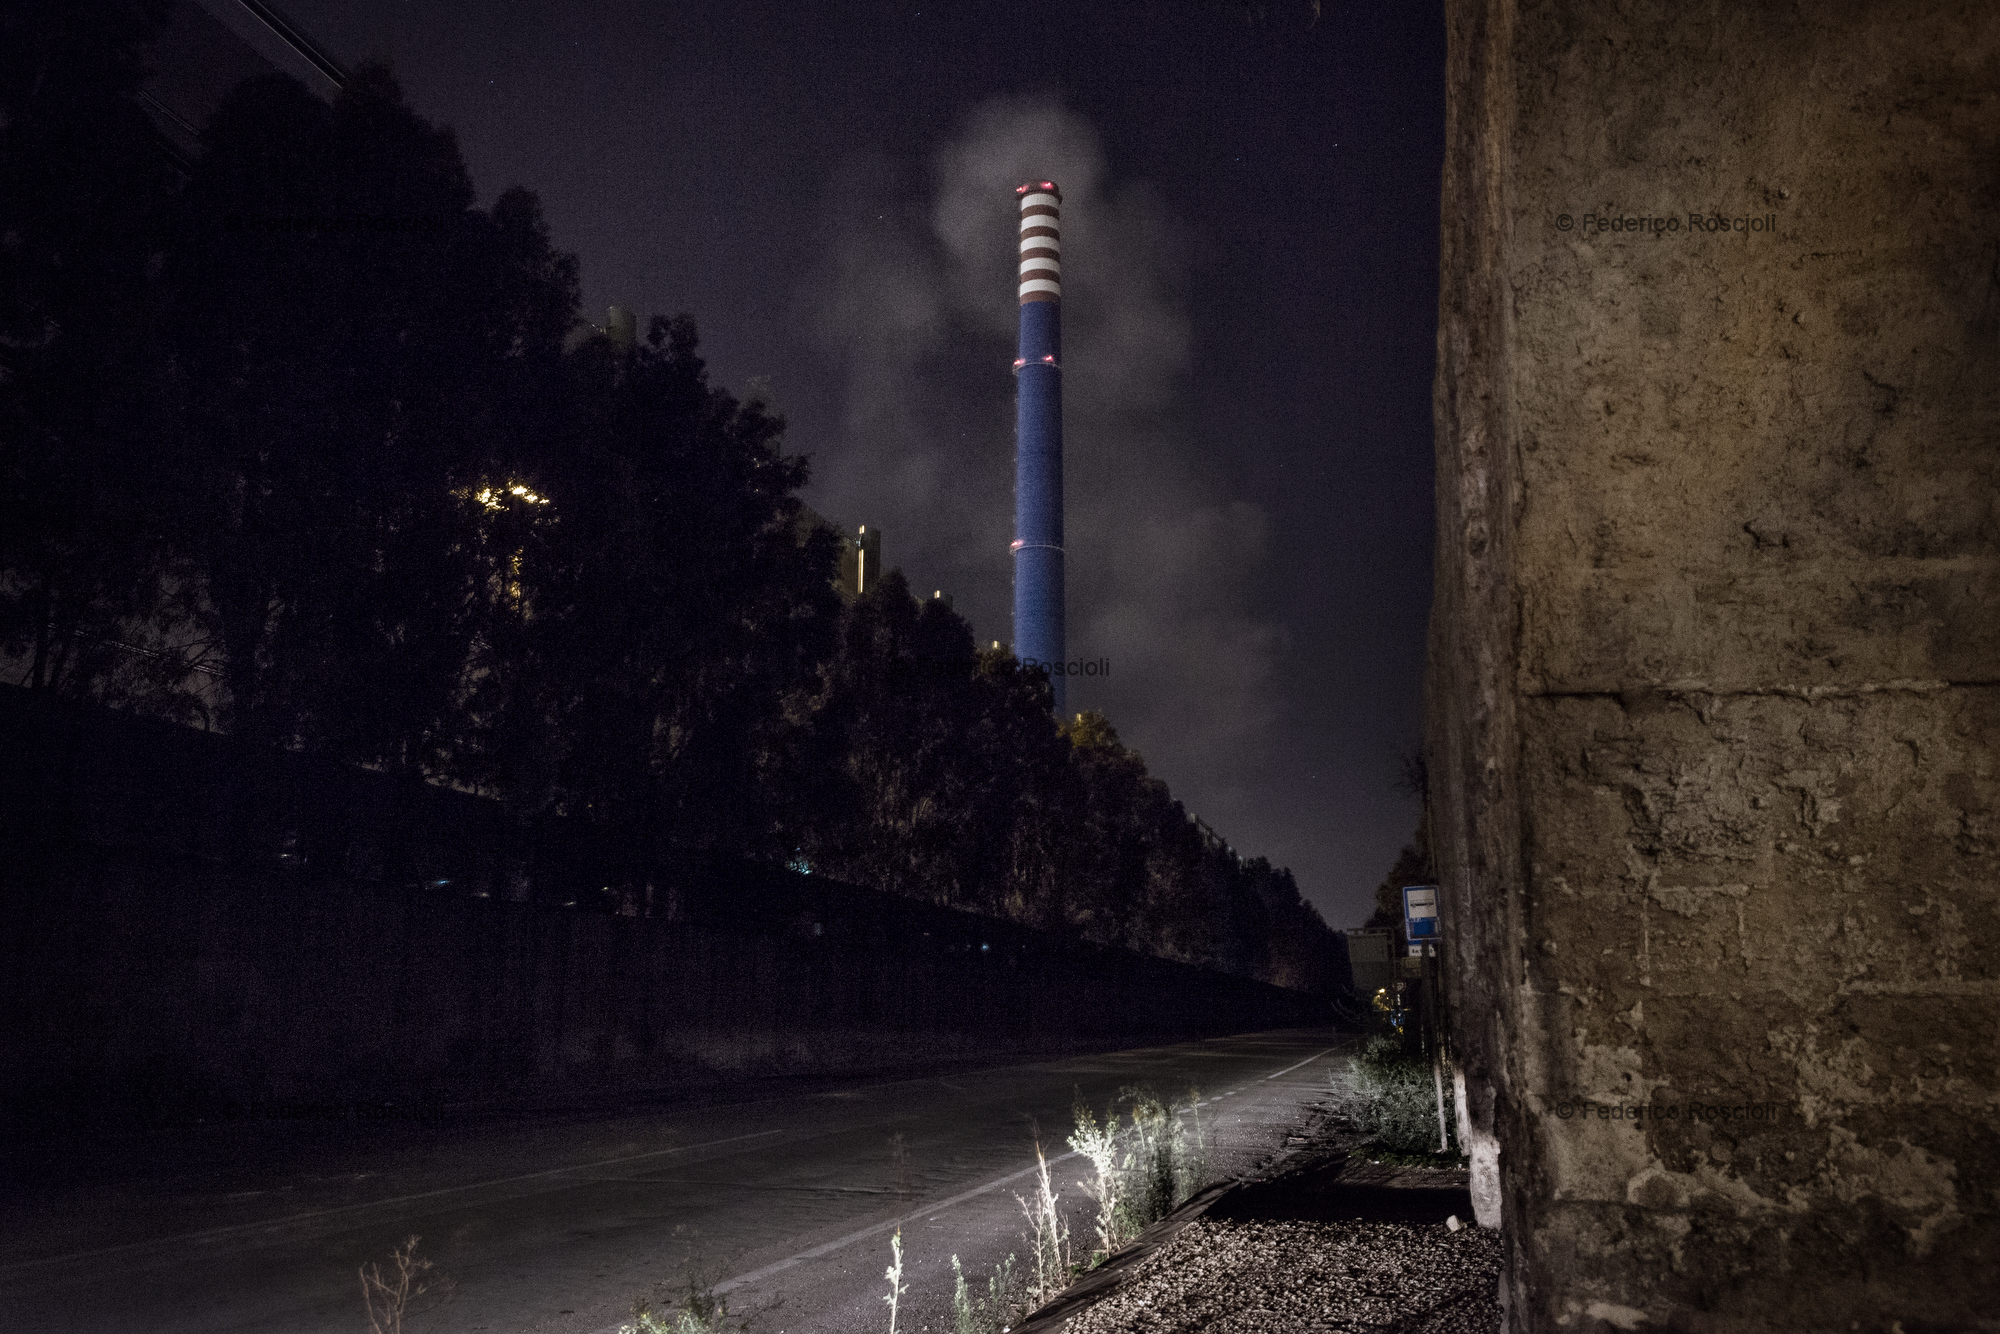 Taranto, Italy, September 26, 2013. Ilva chimney E312 during the night: this is the major suspect for the release of dioxin in the area. There are no certain data due to partial monitoring under progress. It is easy to see how this chimney works heavier during the night than during the day.